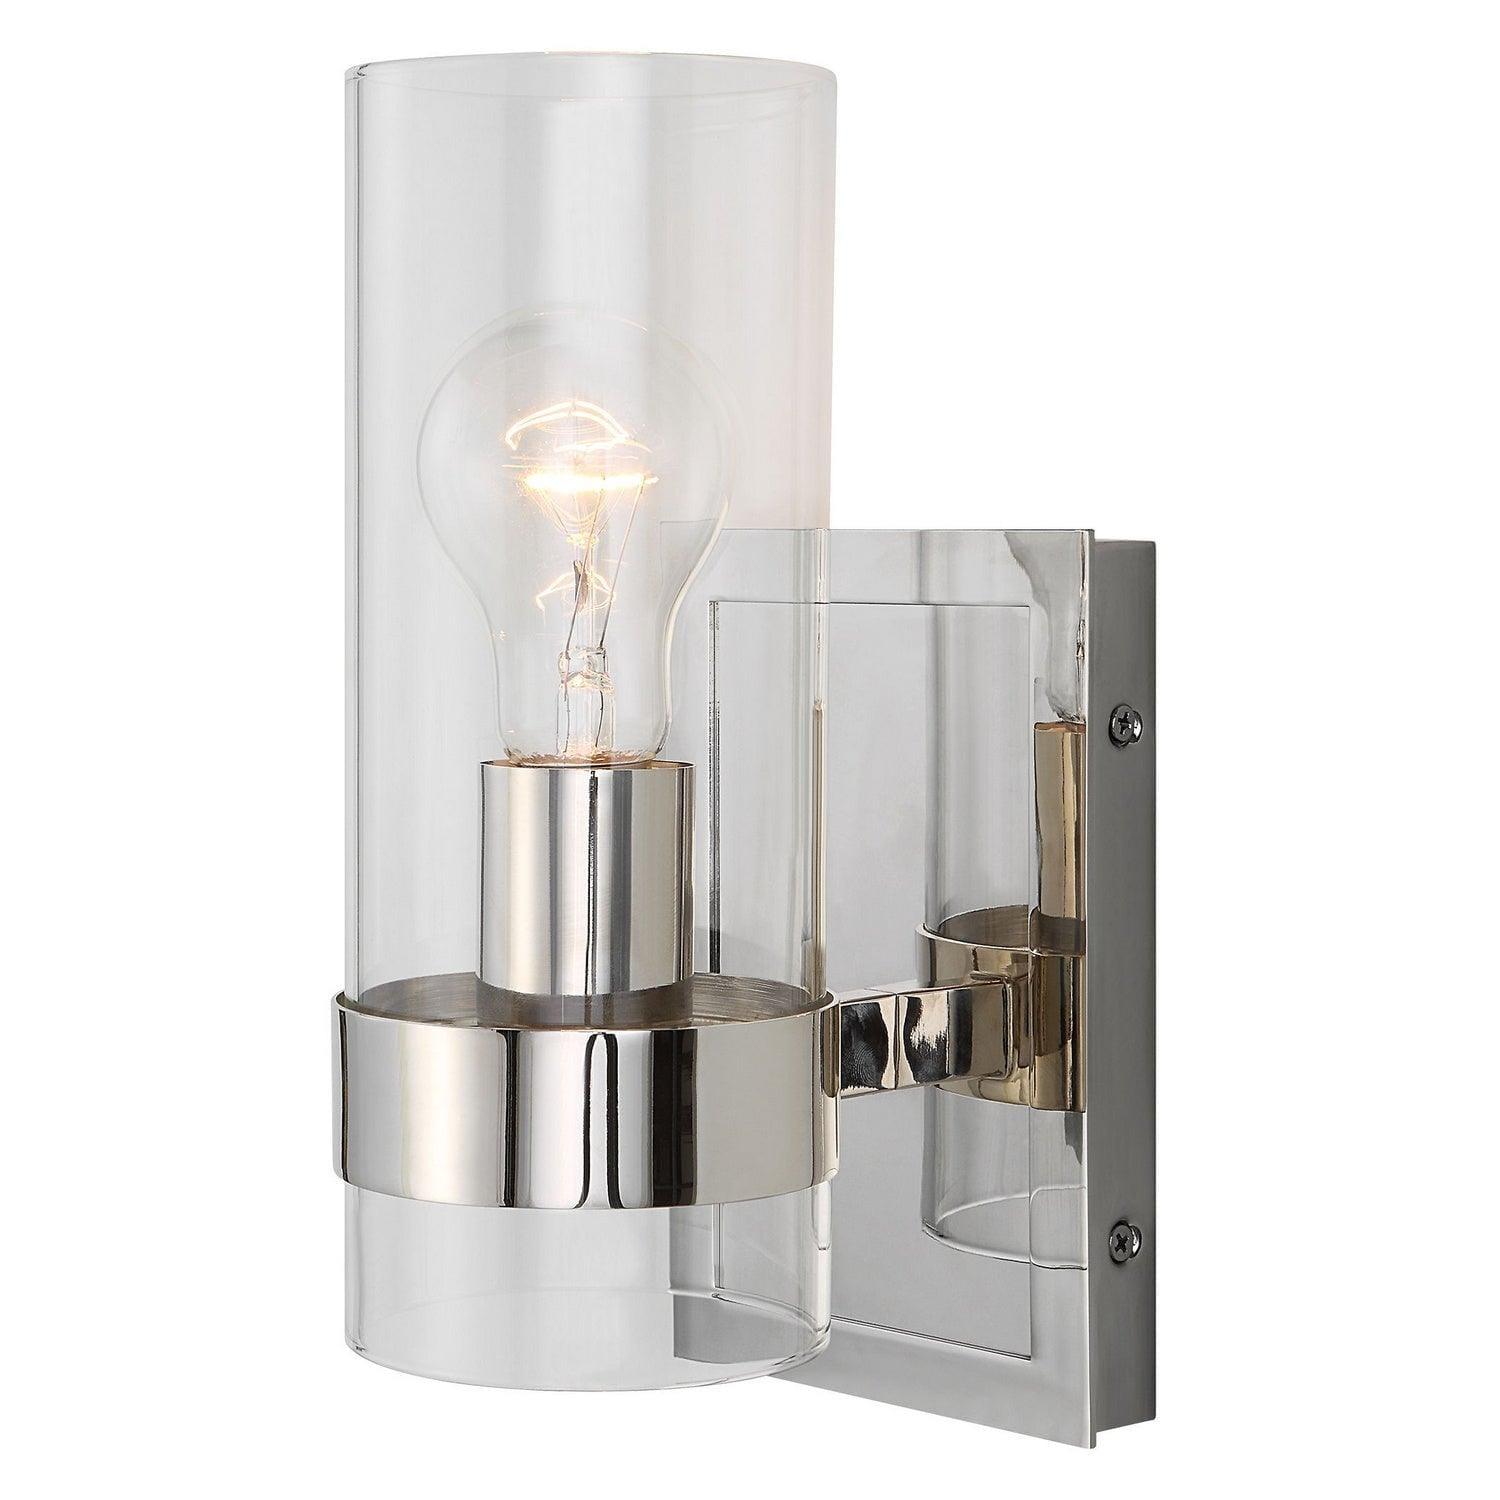 The Uttermost - Cardiff Wall Sconce - 22550 | Montreal Lighting & Hardware